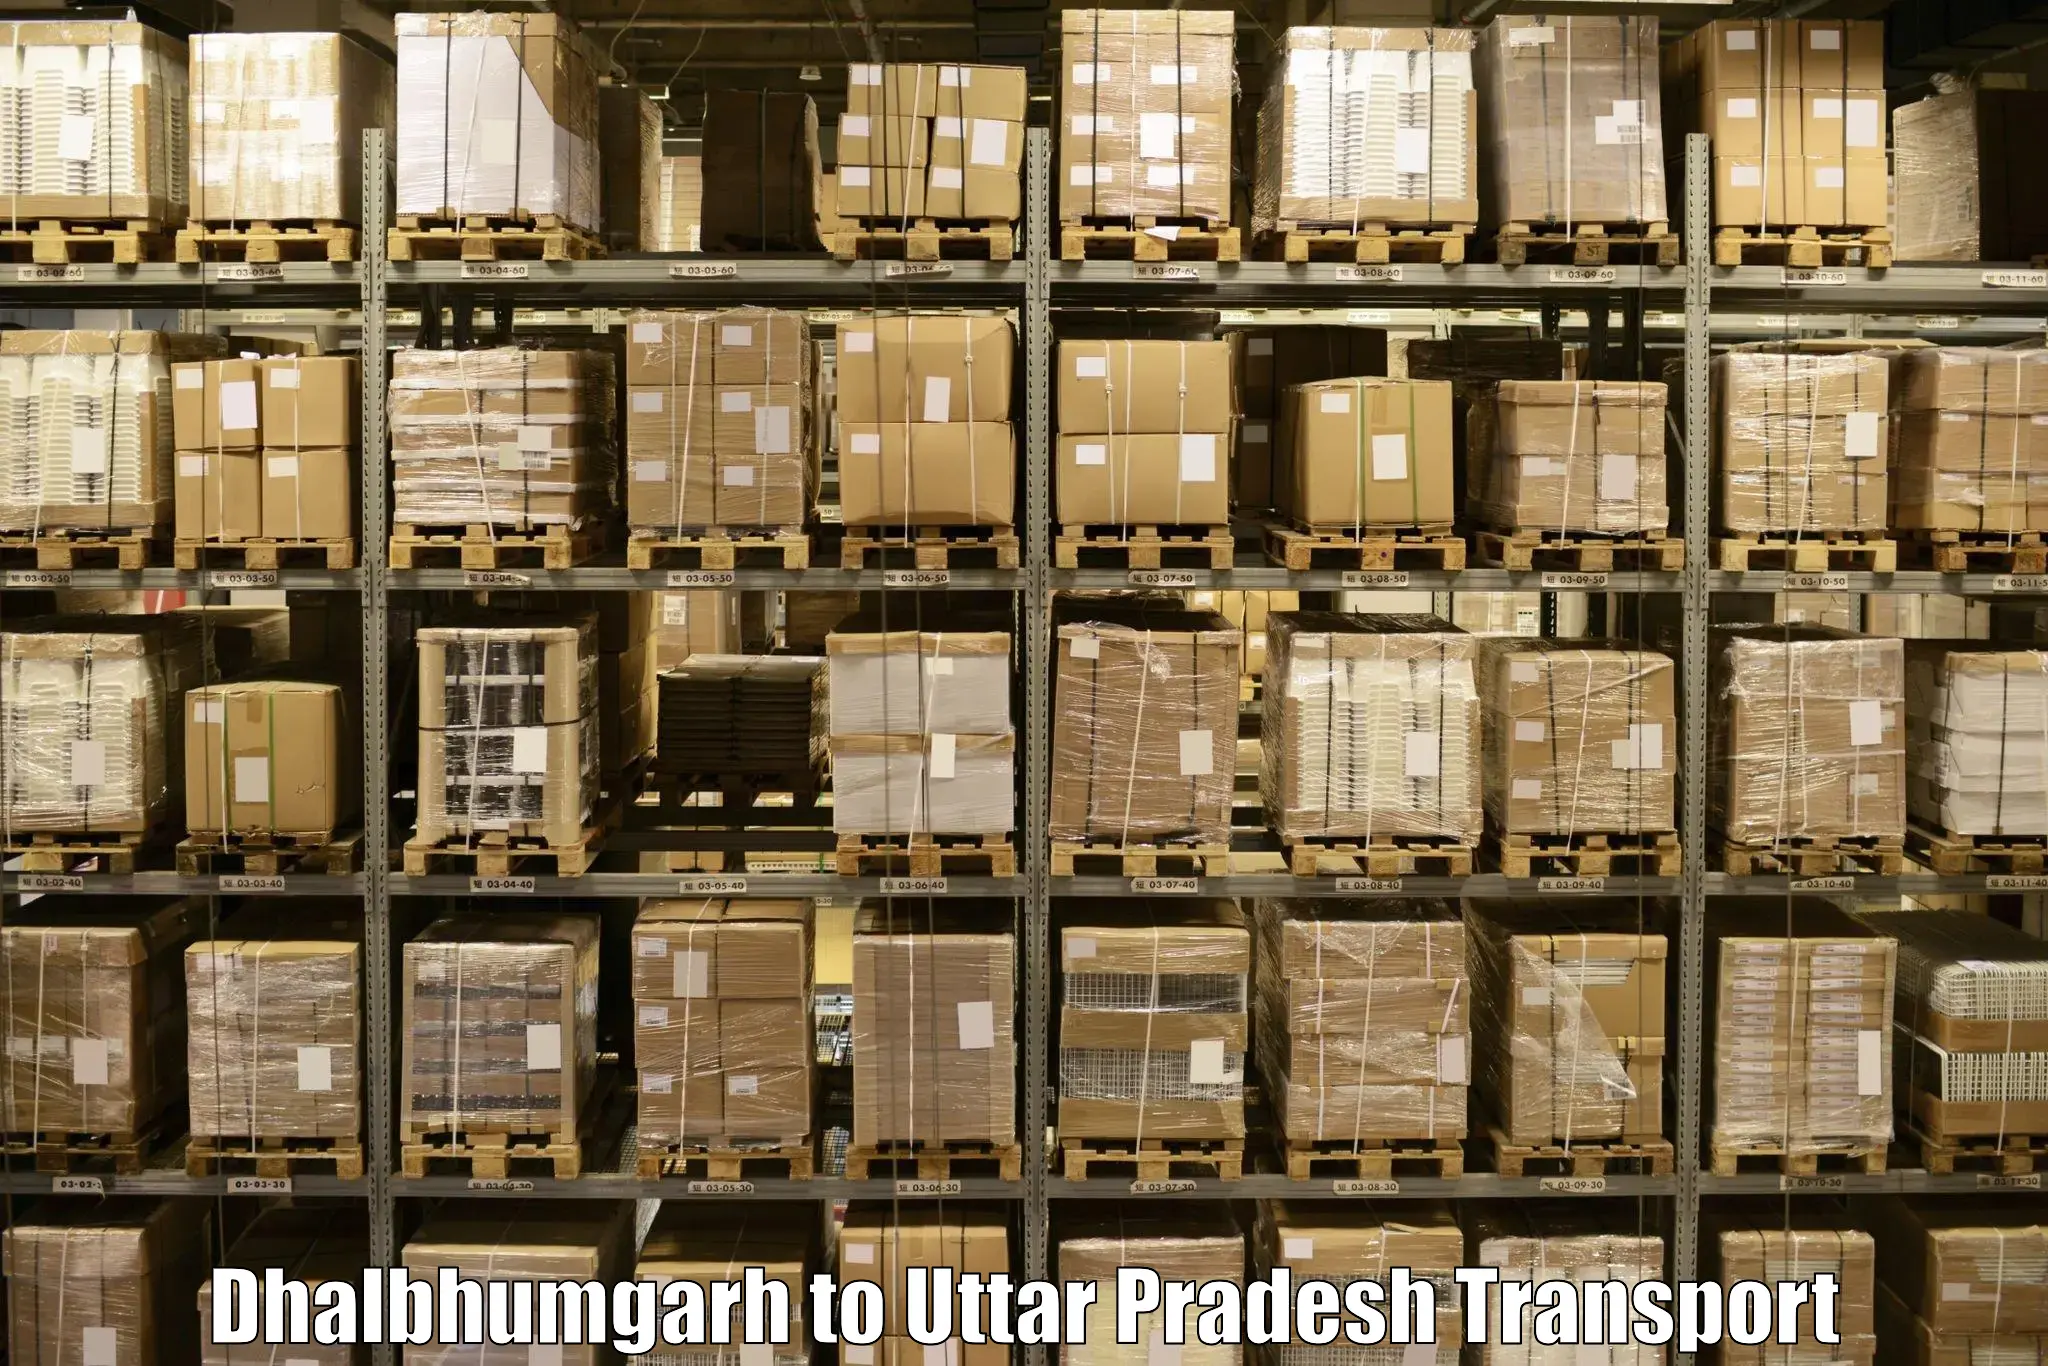 Package delivery services Dhalbhumgarh to Salempur